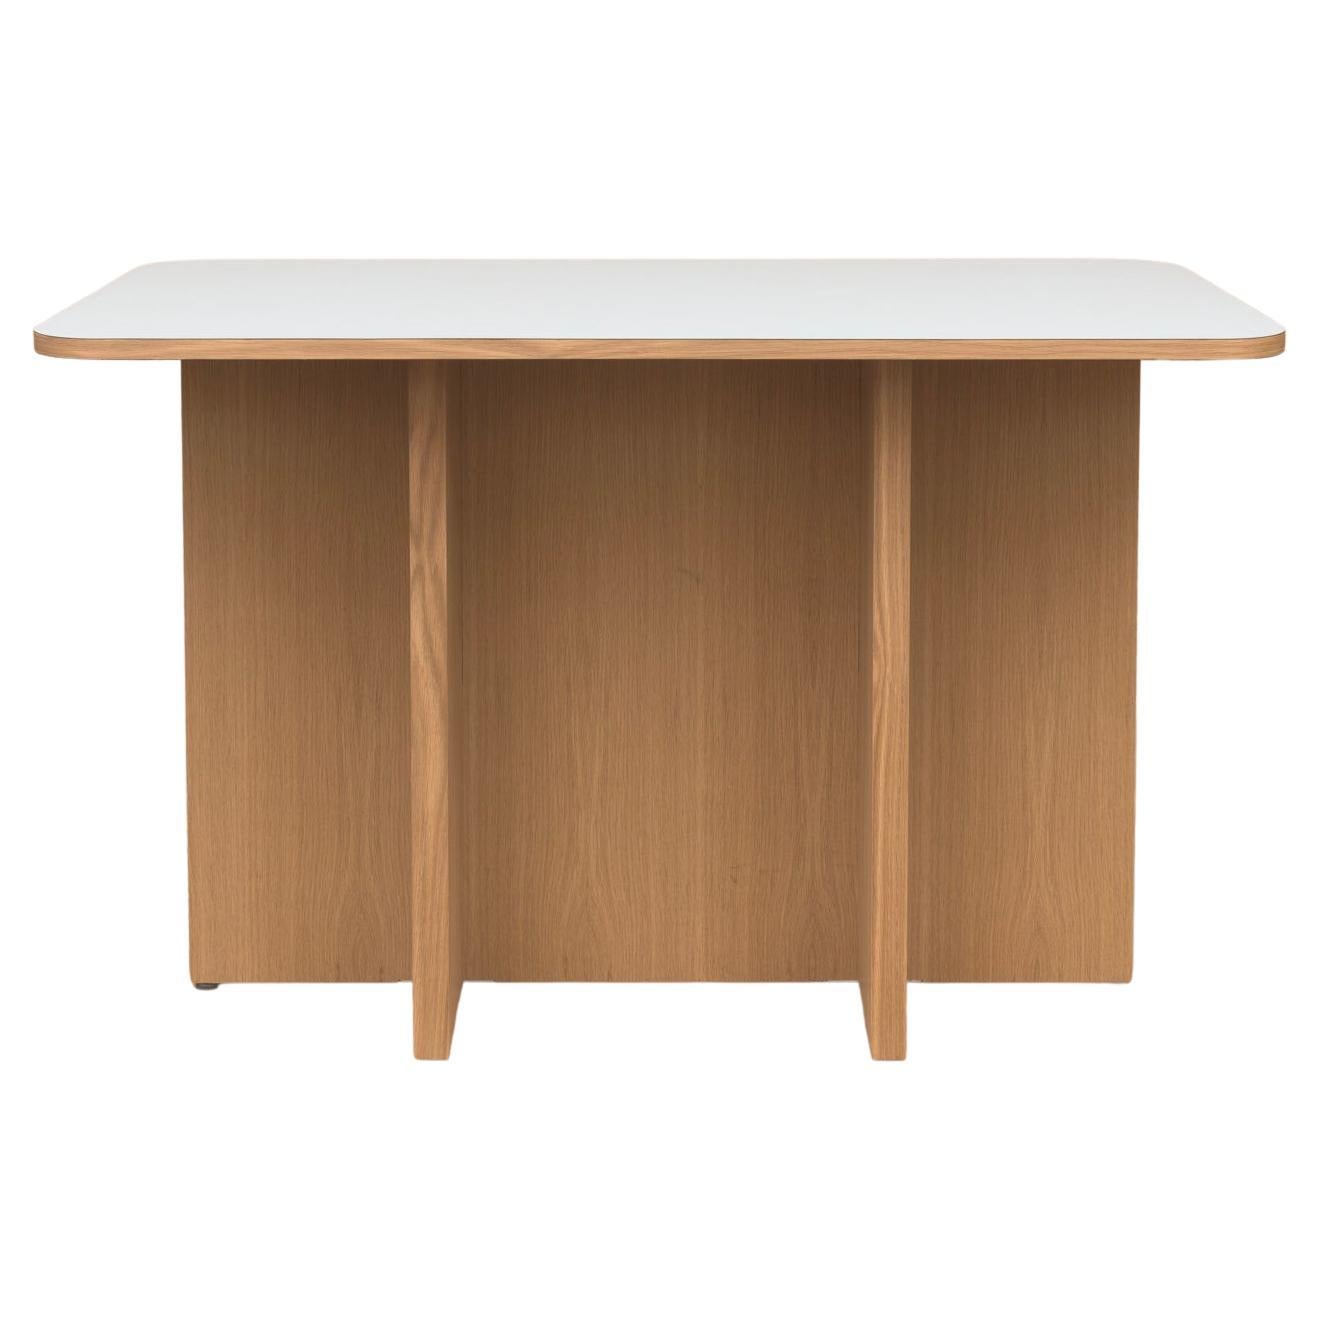 A slim and elegant 4-top table series that pairs geometric shapes with traditional Japanese-inspired joinery. Available in a wide variety of colors, finishes, and dimensions. T-top tables are also sold as full dinette sets with a pair of T-top